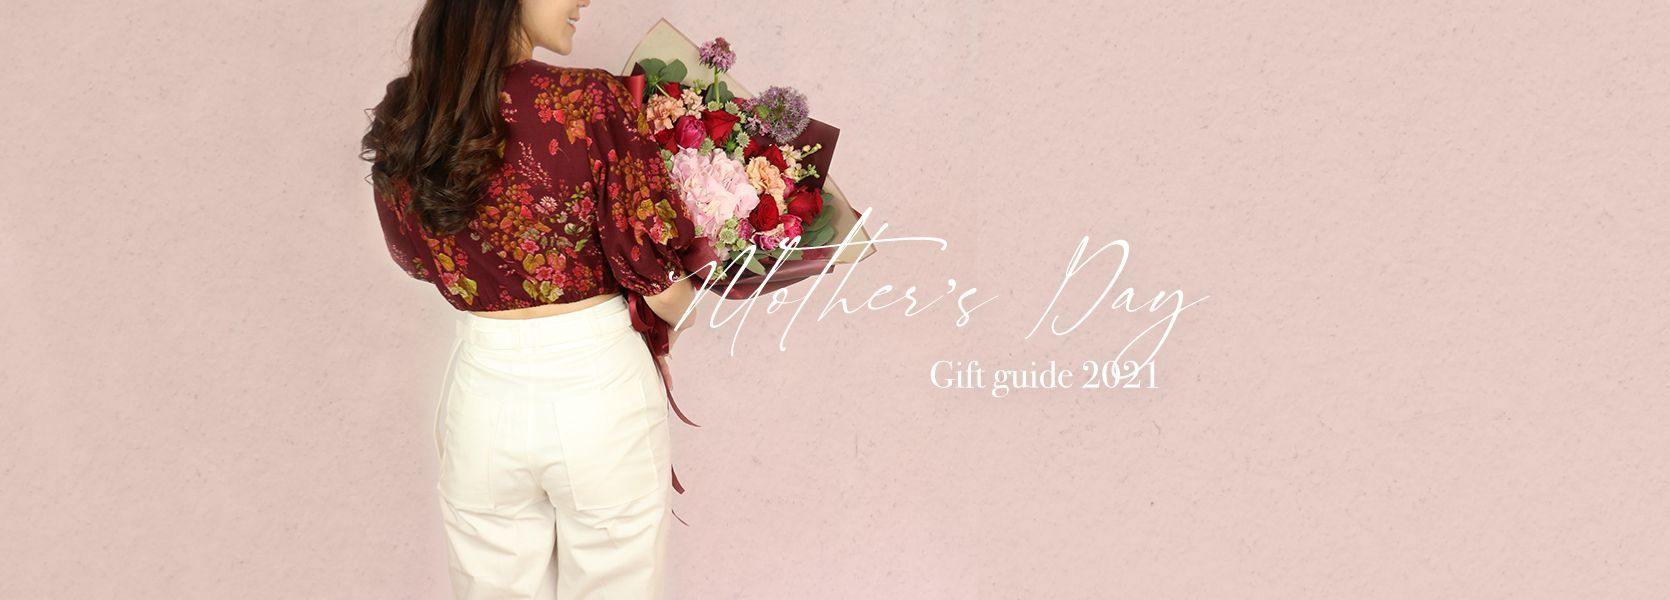 VOL X - MOTHER'S DAY GIFT GUIDE 2021 - CLOSET Singapore